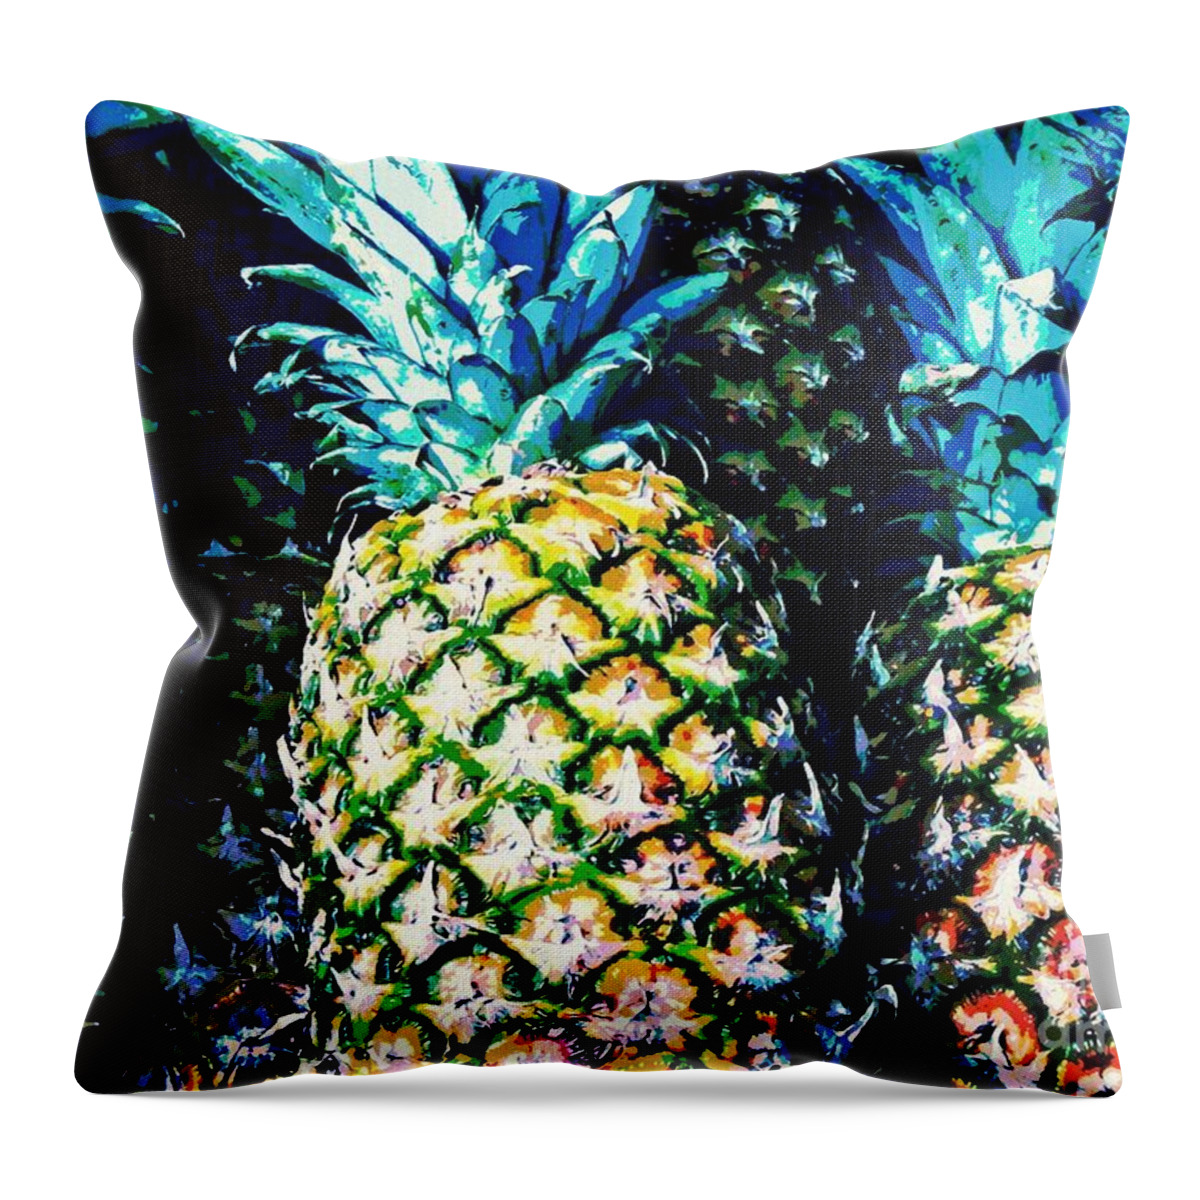 Pineapple Throw Pillow featuring the photograph Pineapples by Sarah Loft